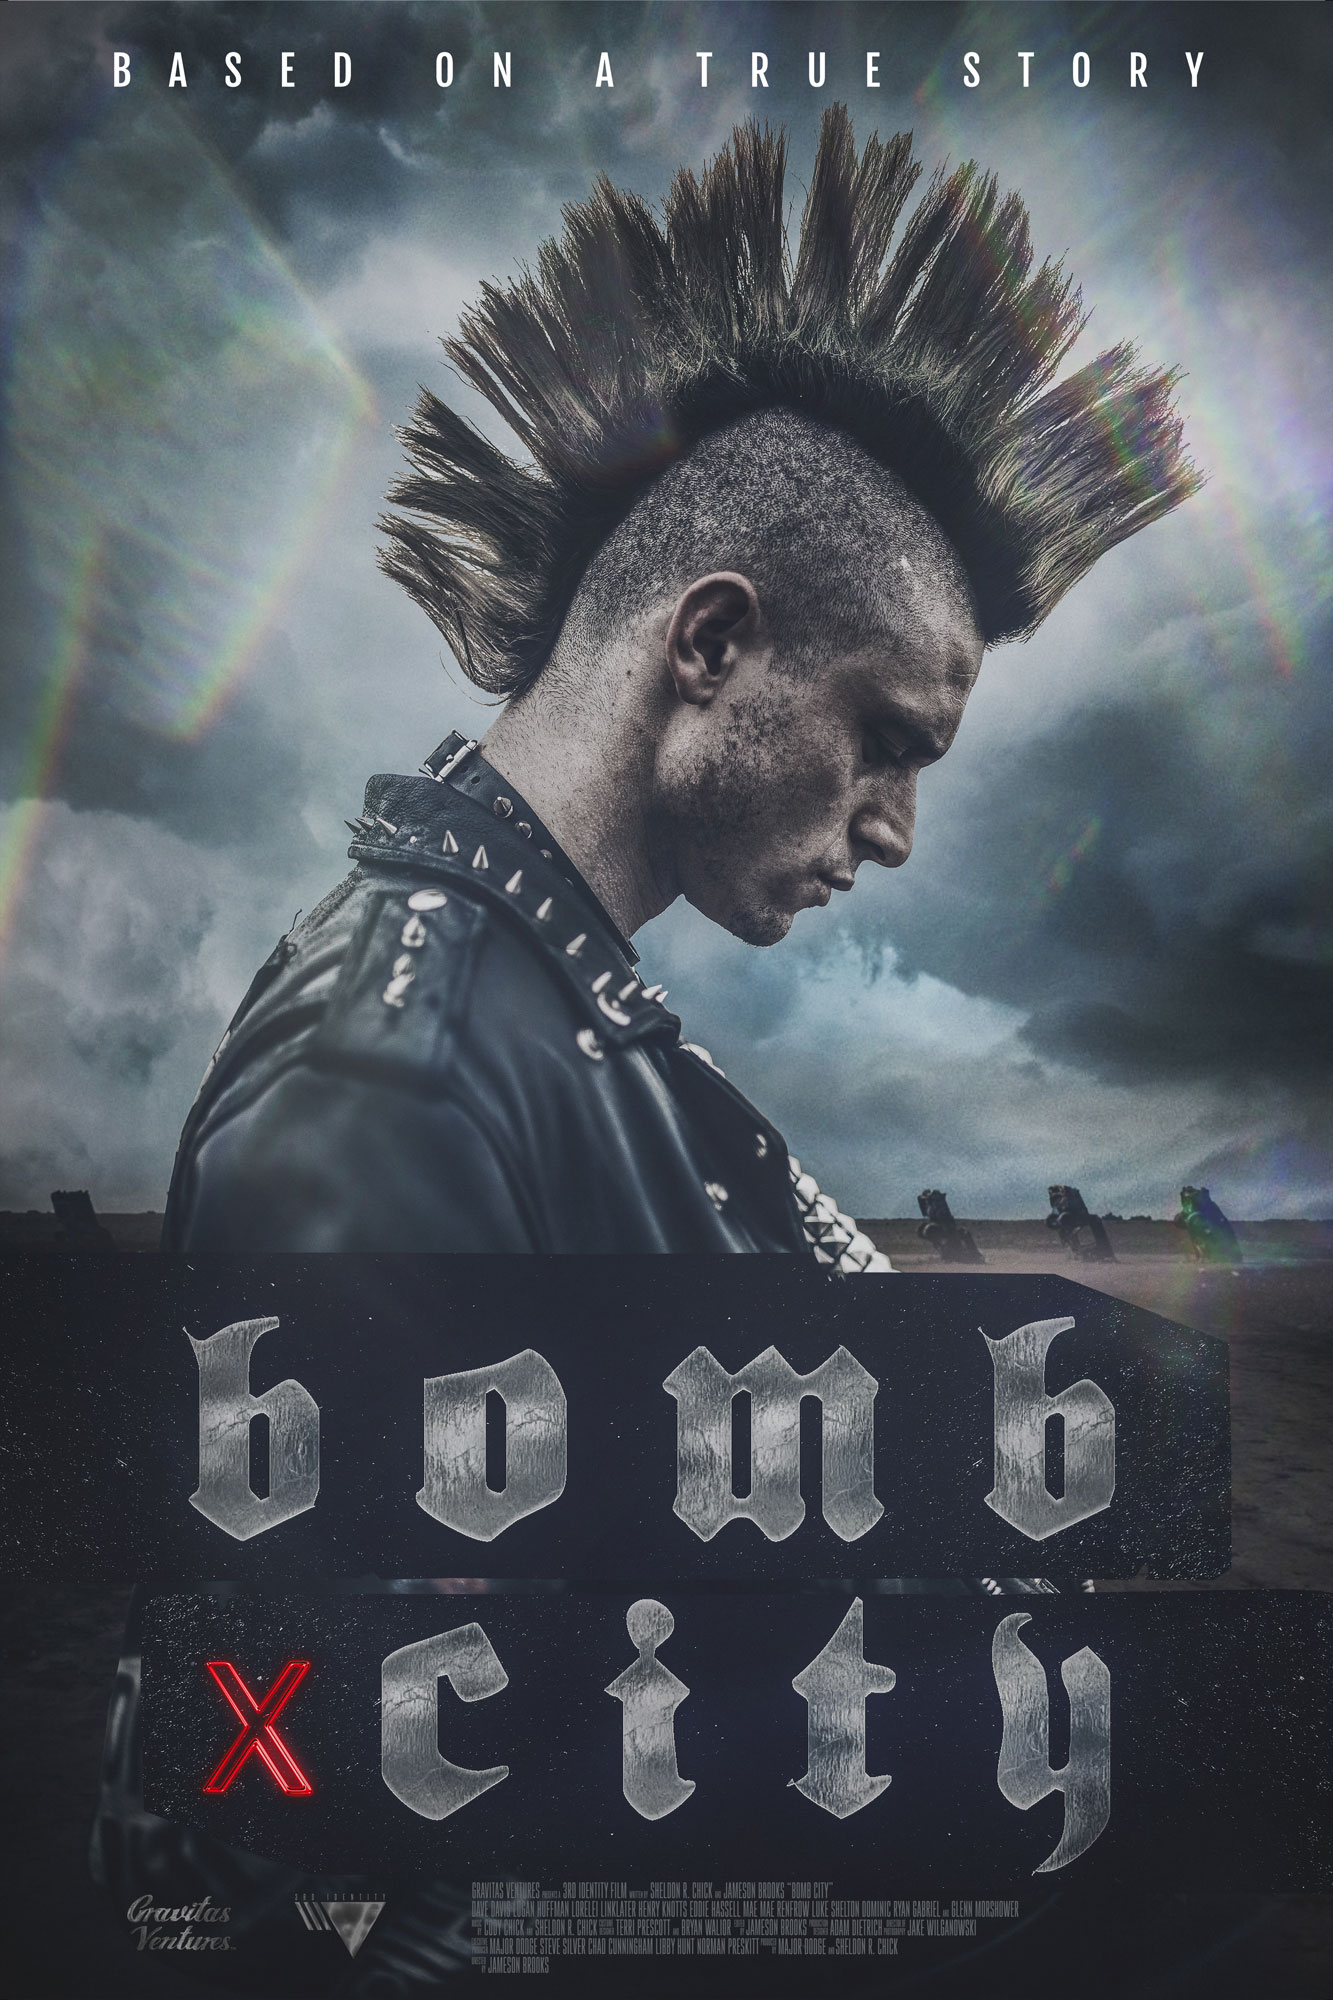 Crime drama “Bomb City” releases to theaters